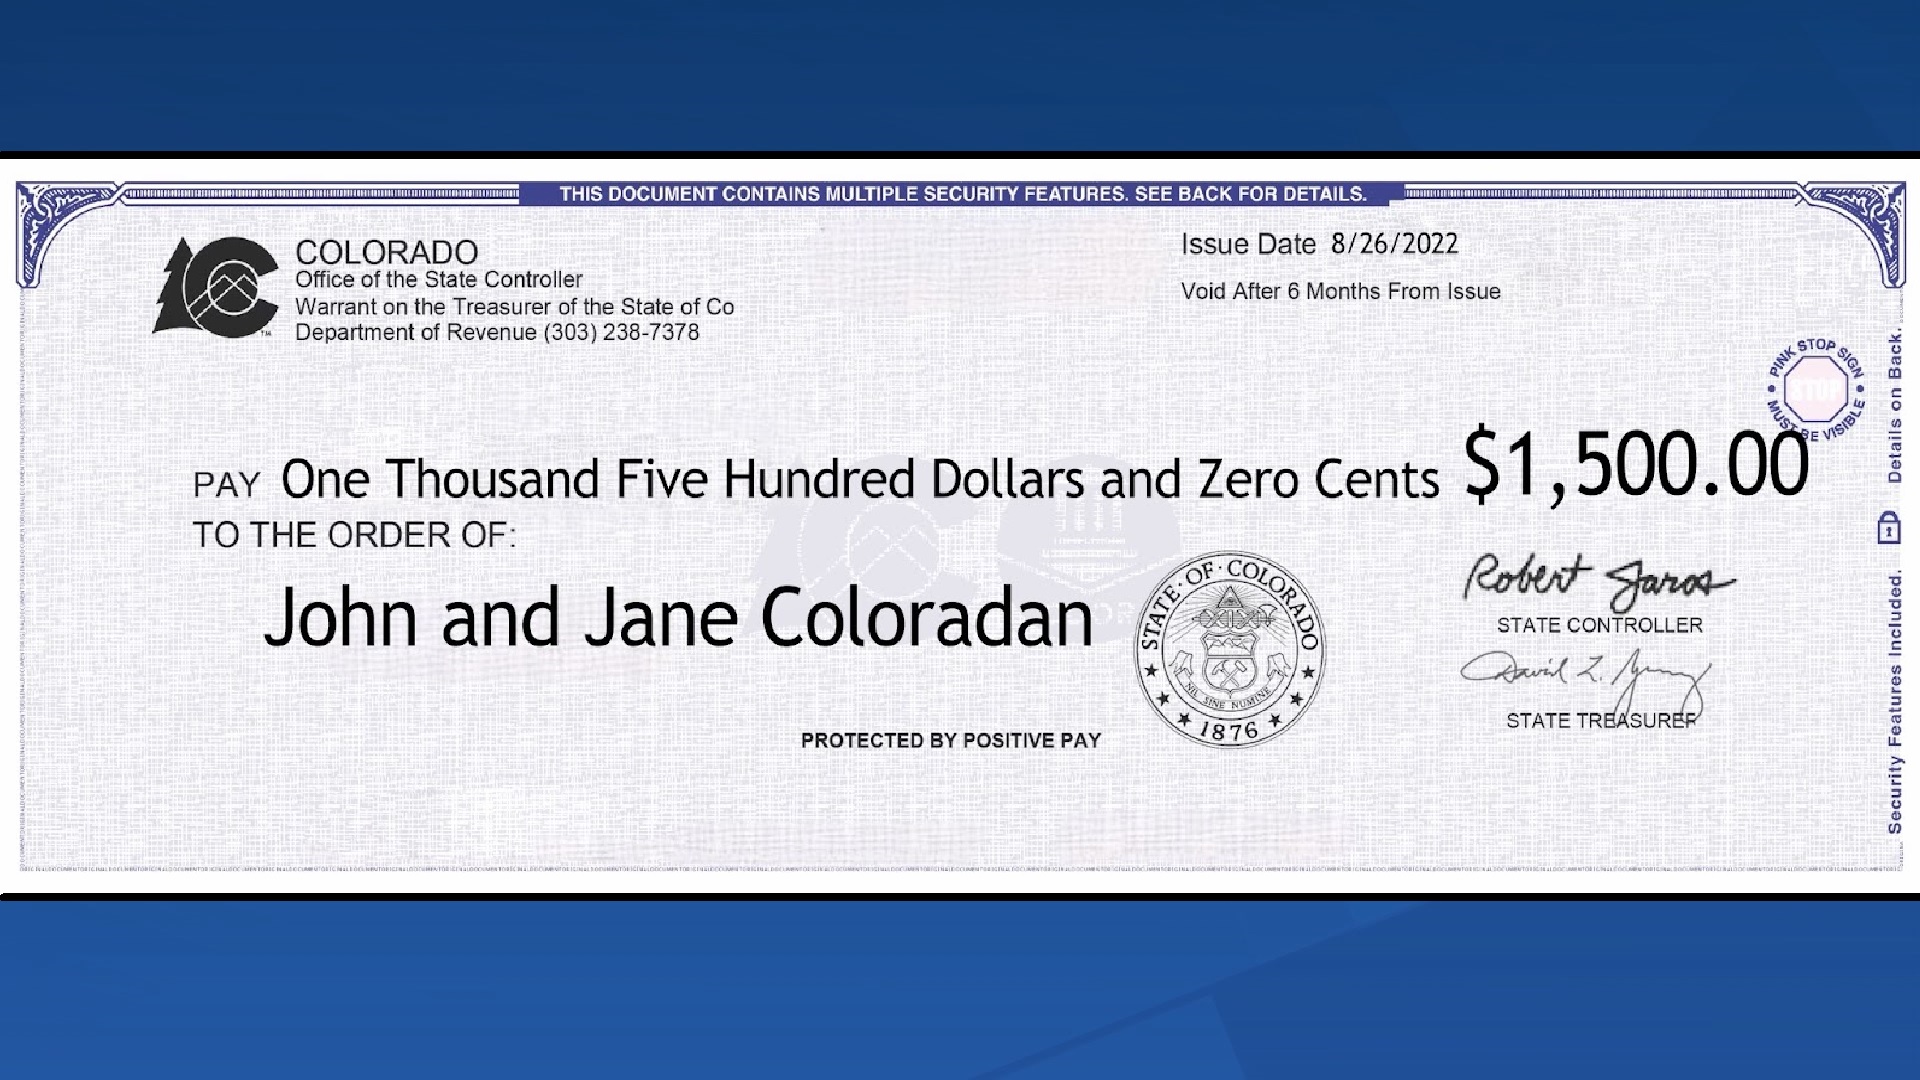 Call center set up in Colorado for TABOR refund checks, 55% of checks  mailed out have been cashed as of Aug. 17